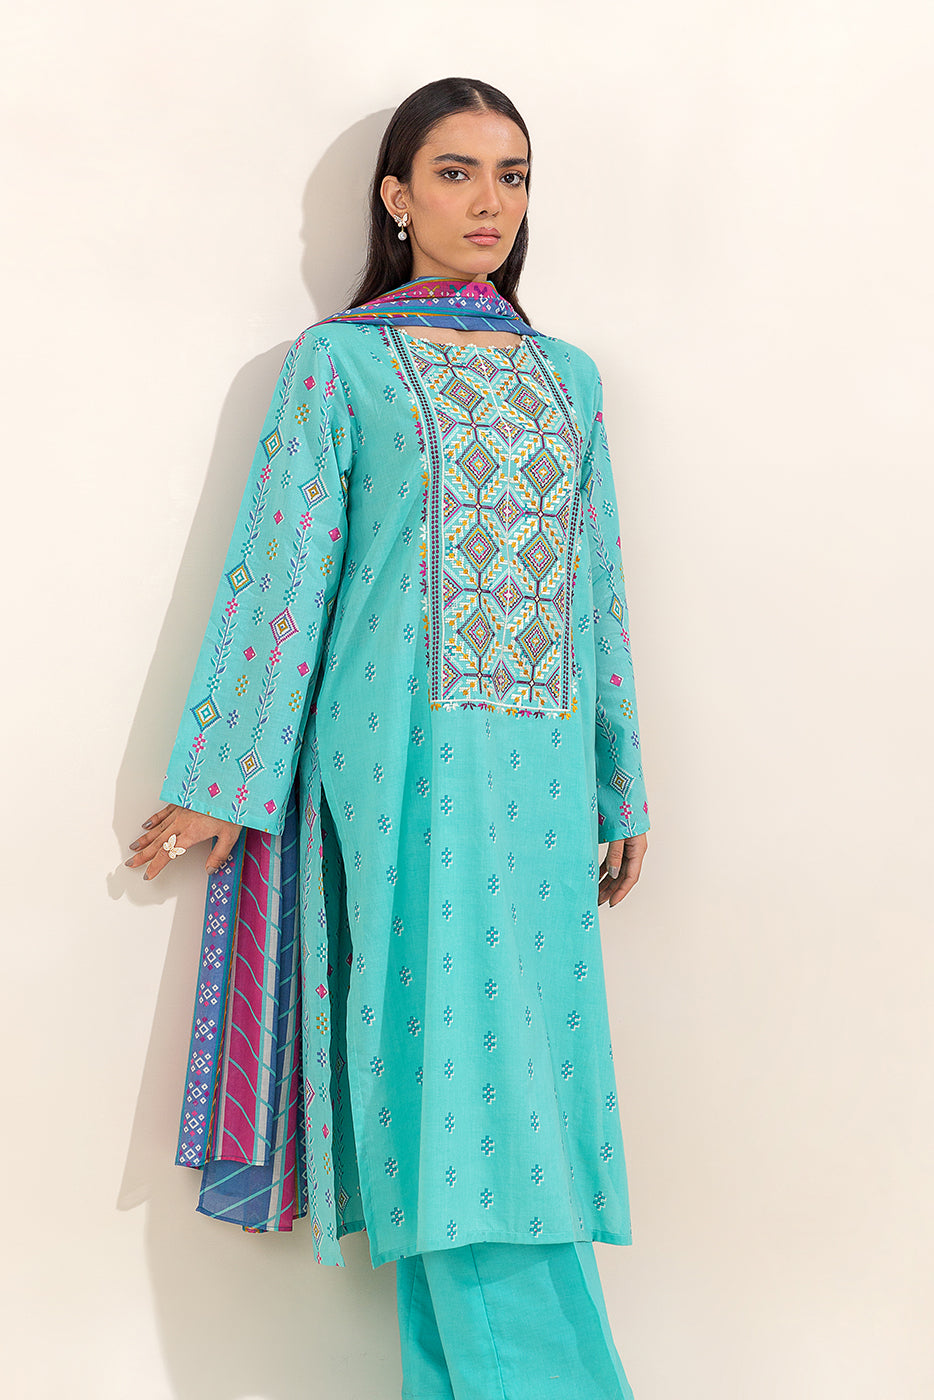 2 PIECE EMBROIDERED LAWN SUIT-REEF WATERS (UNSTITCHED) - BEECHTREE